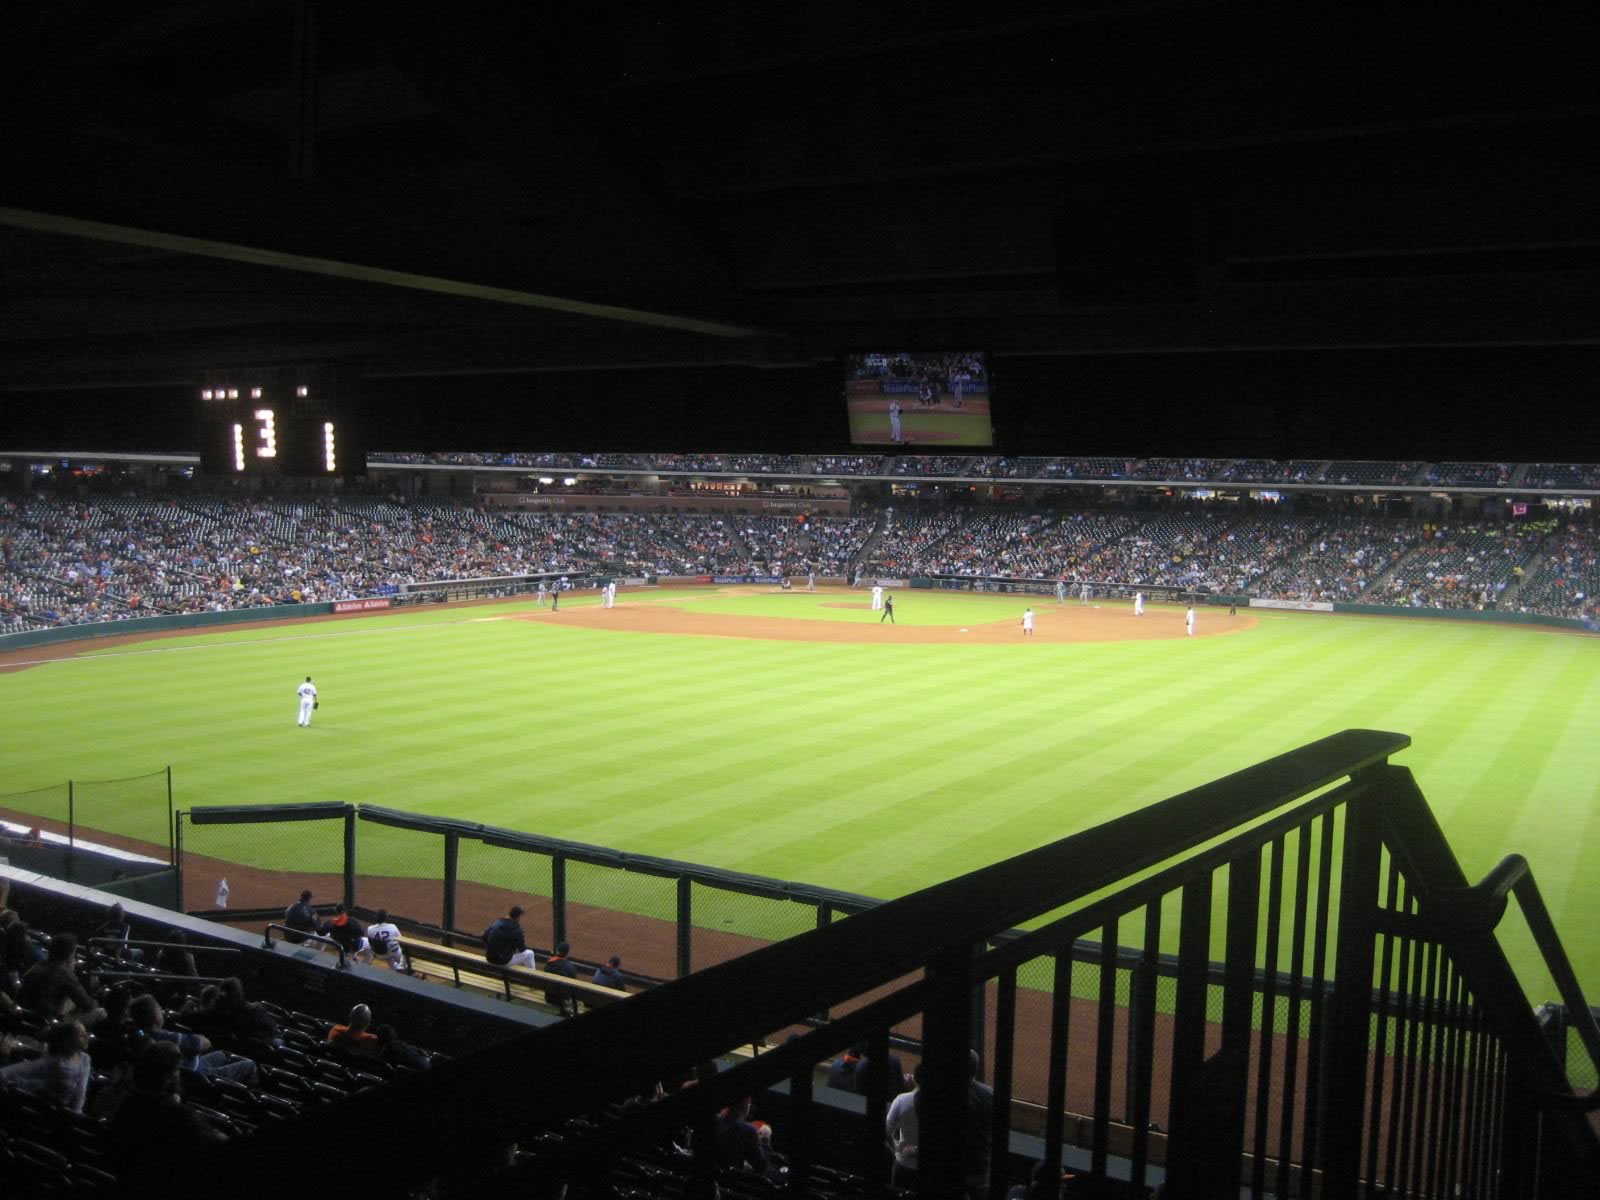 A view of Minute Maid Park from the shallow left field upper deck